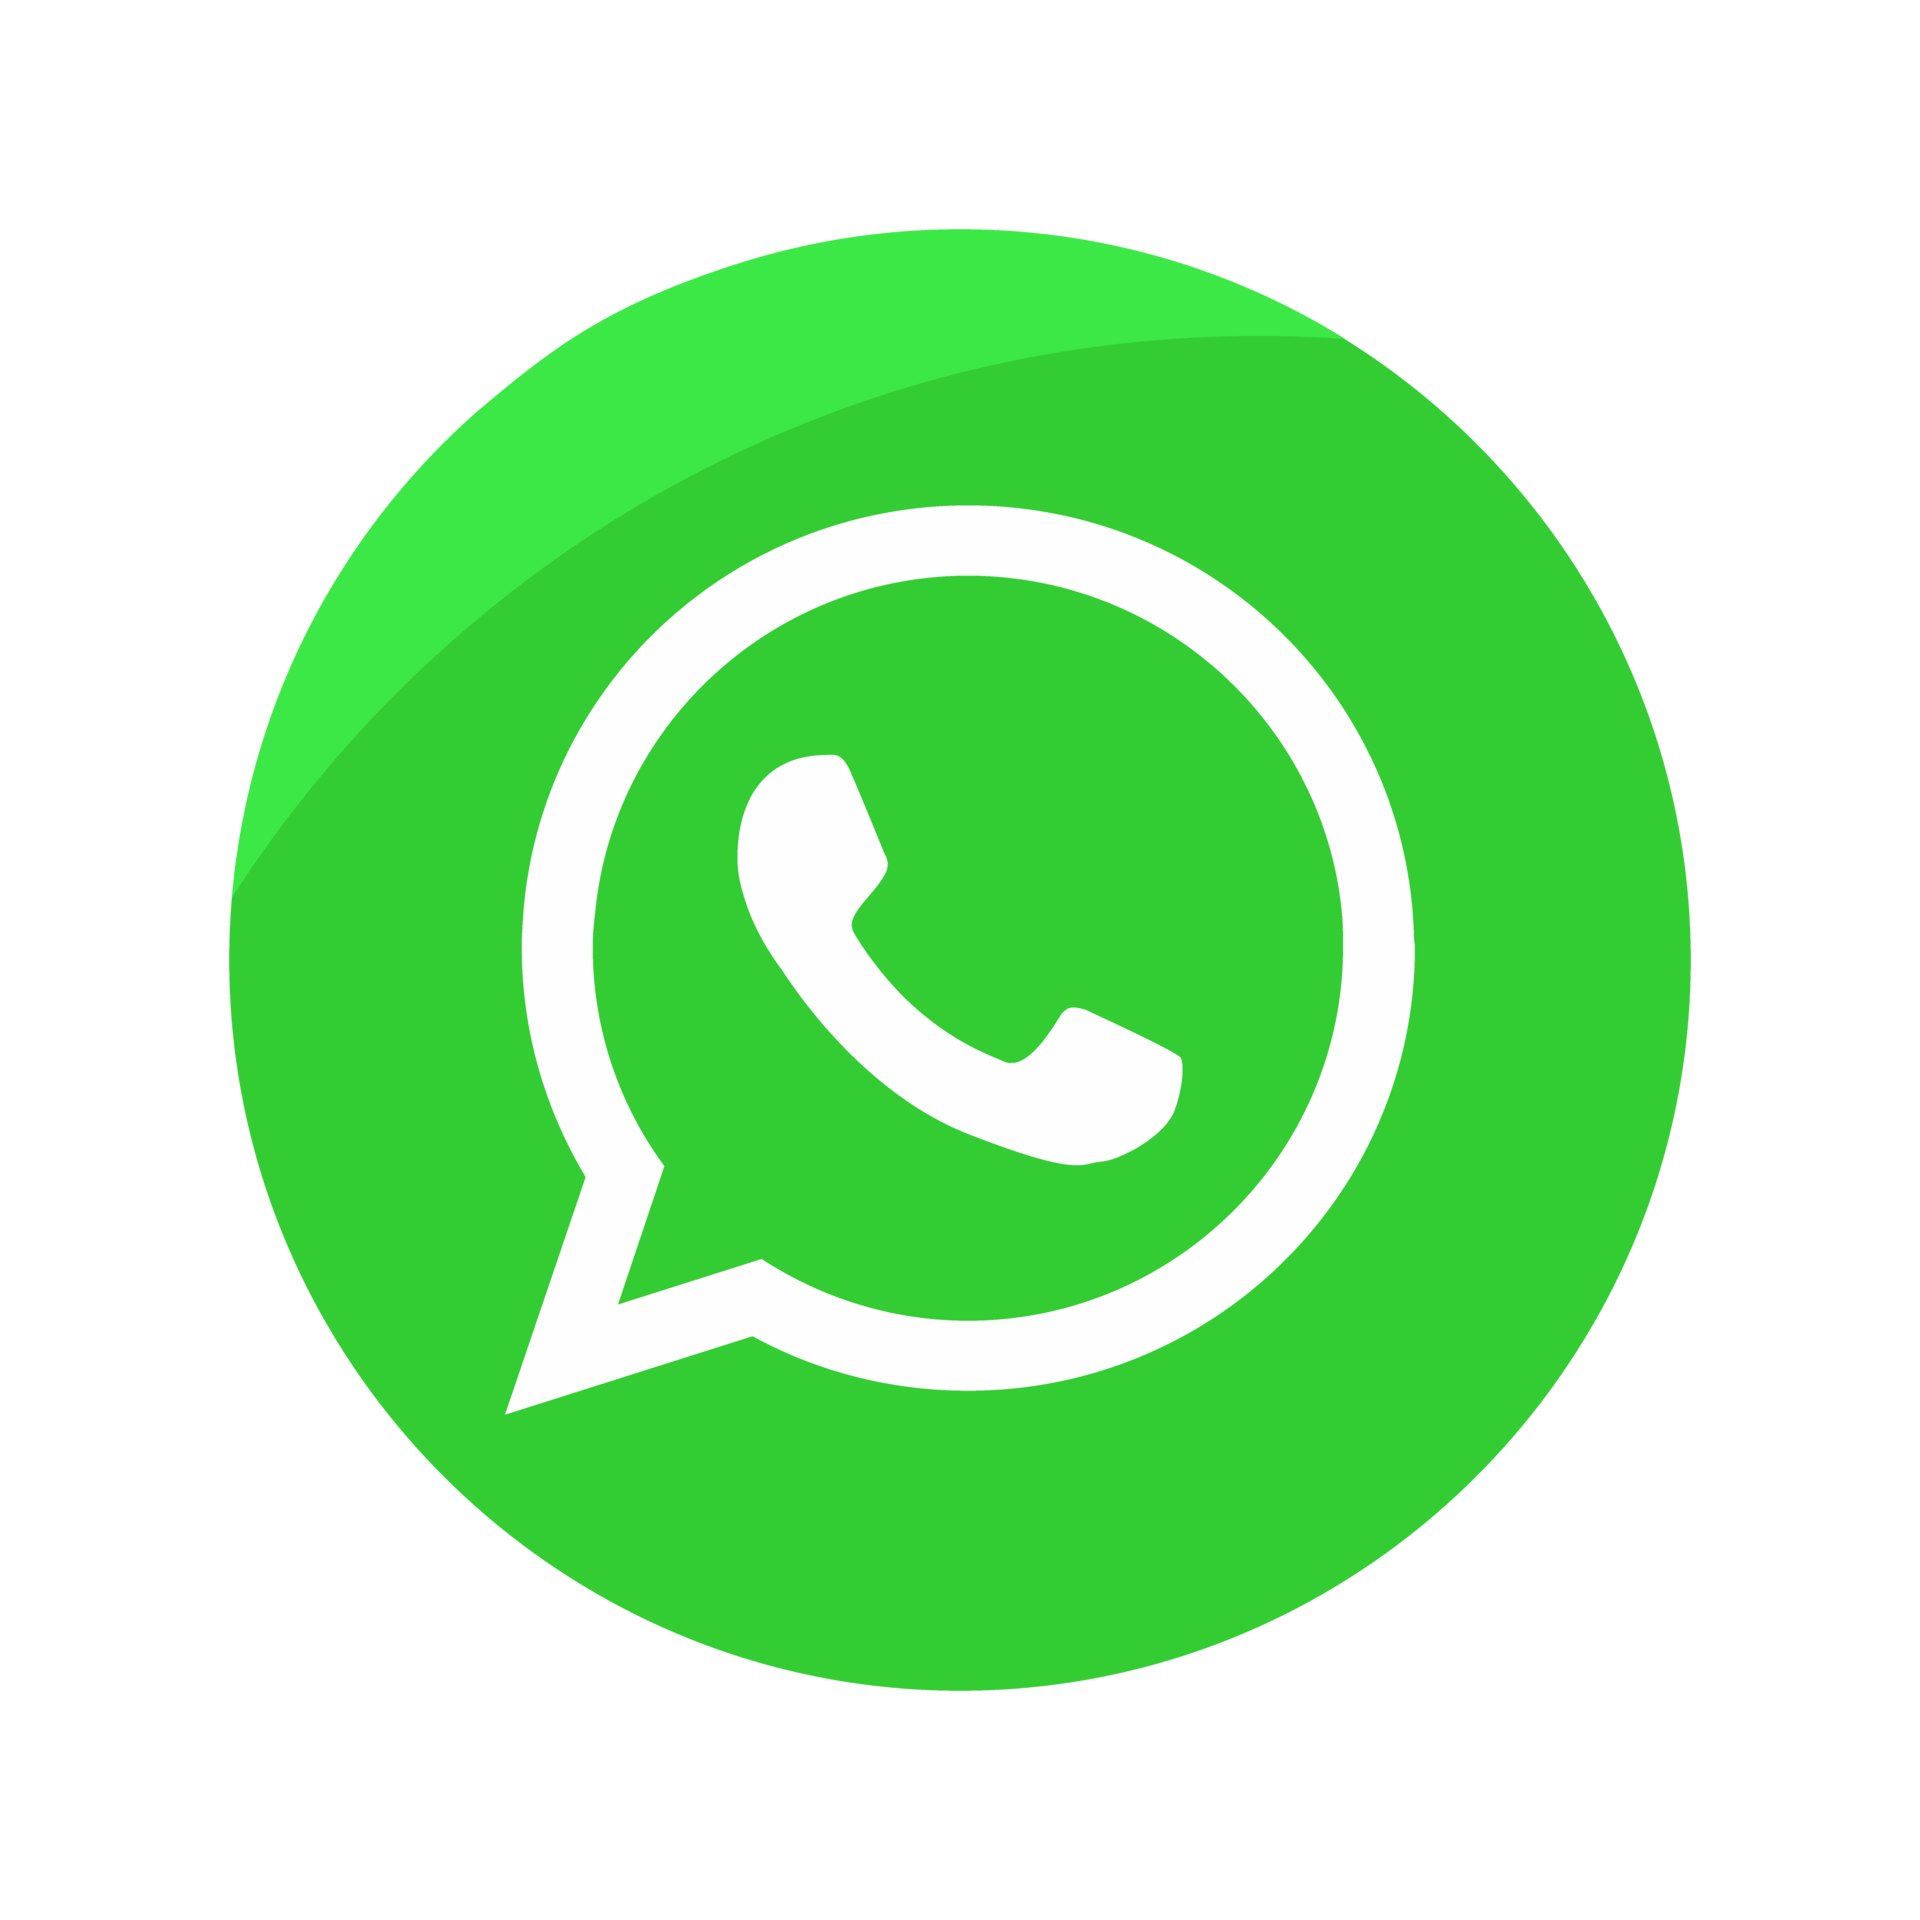 Icone Whatsapp PNG Free Images with Transparent Background - (321 Free  Downloads)